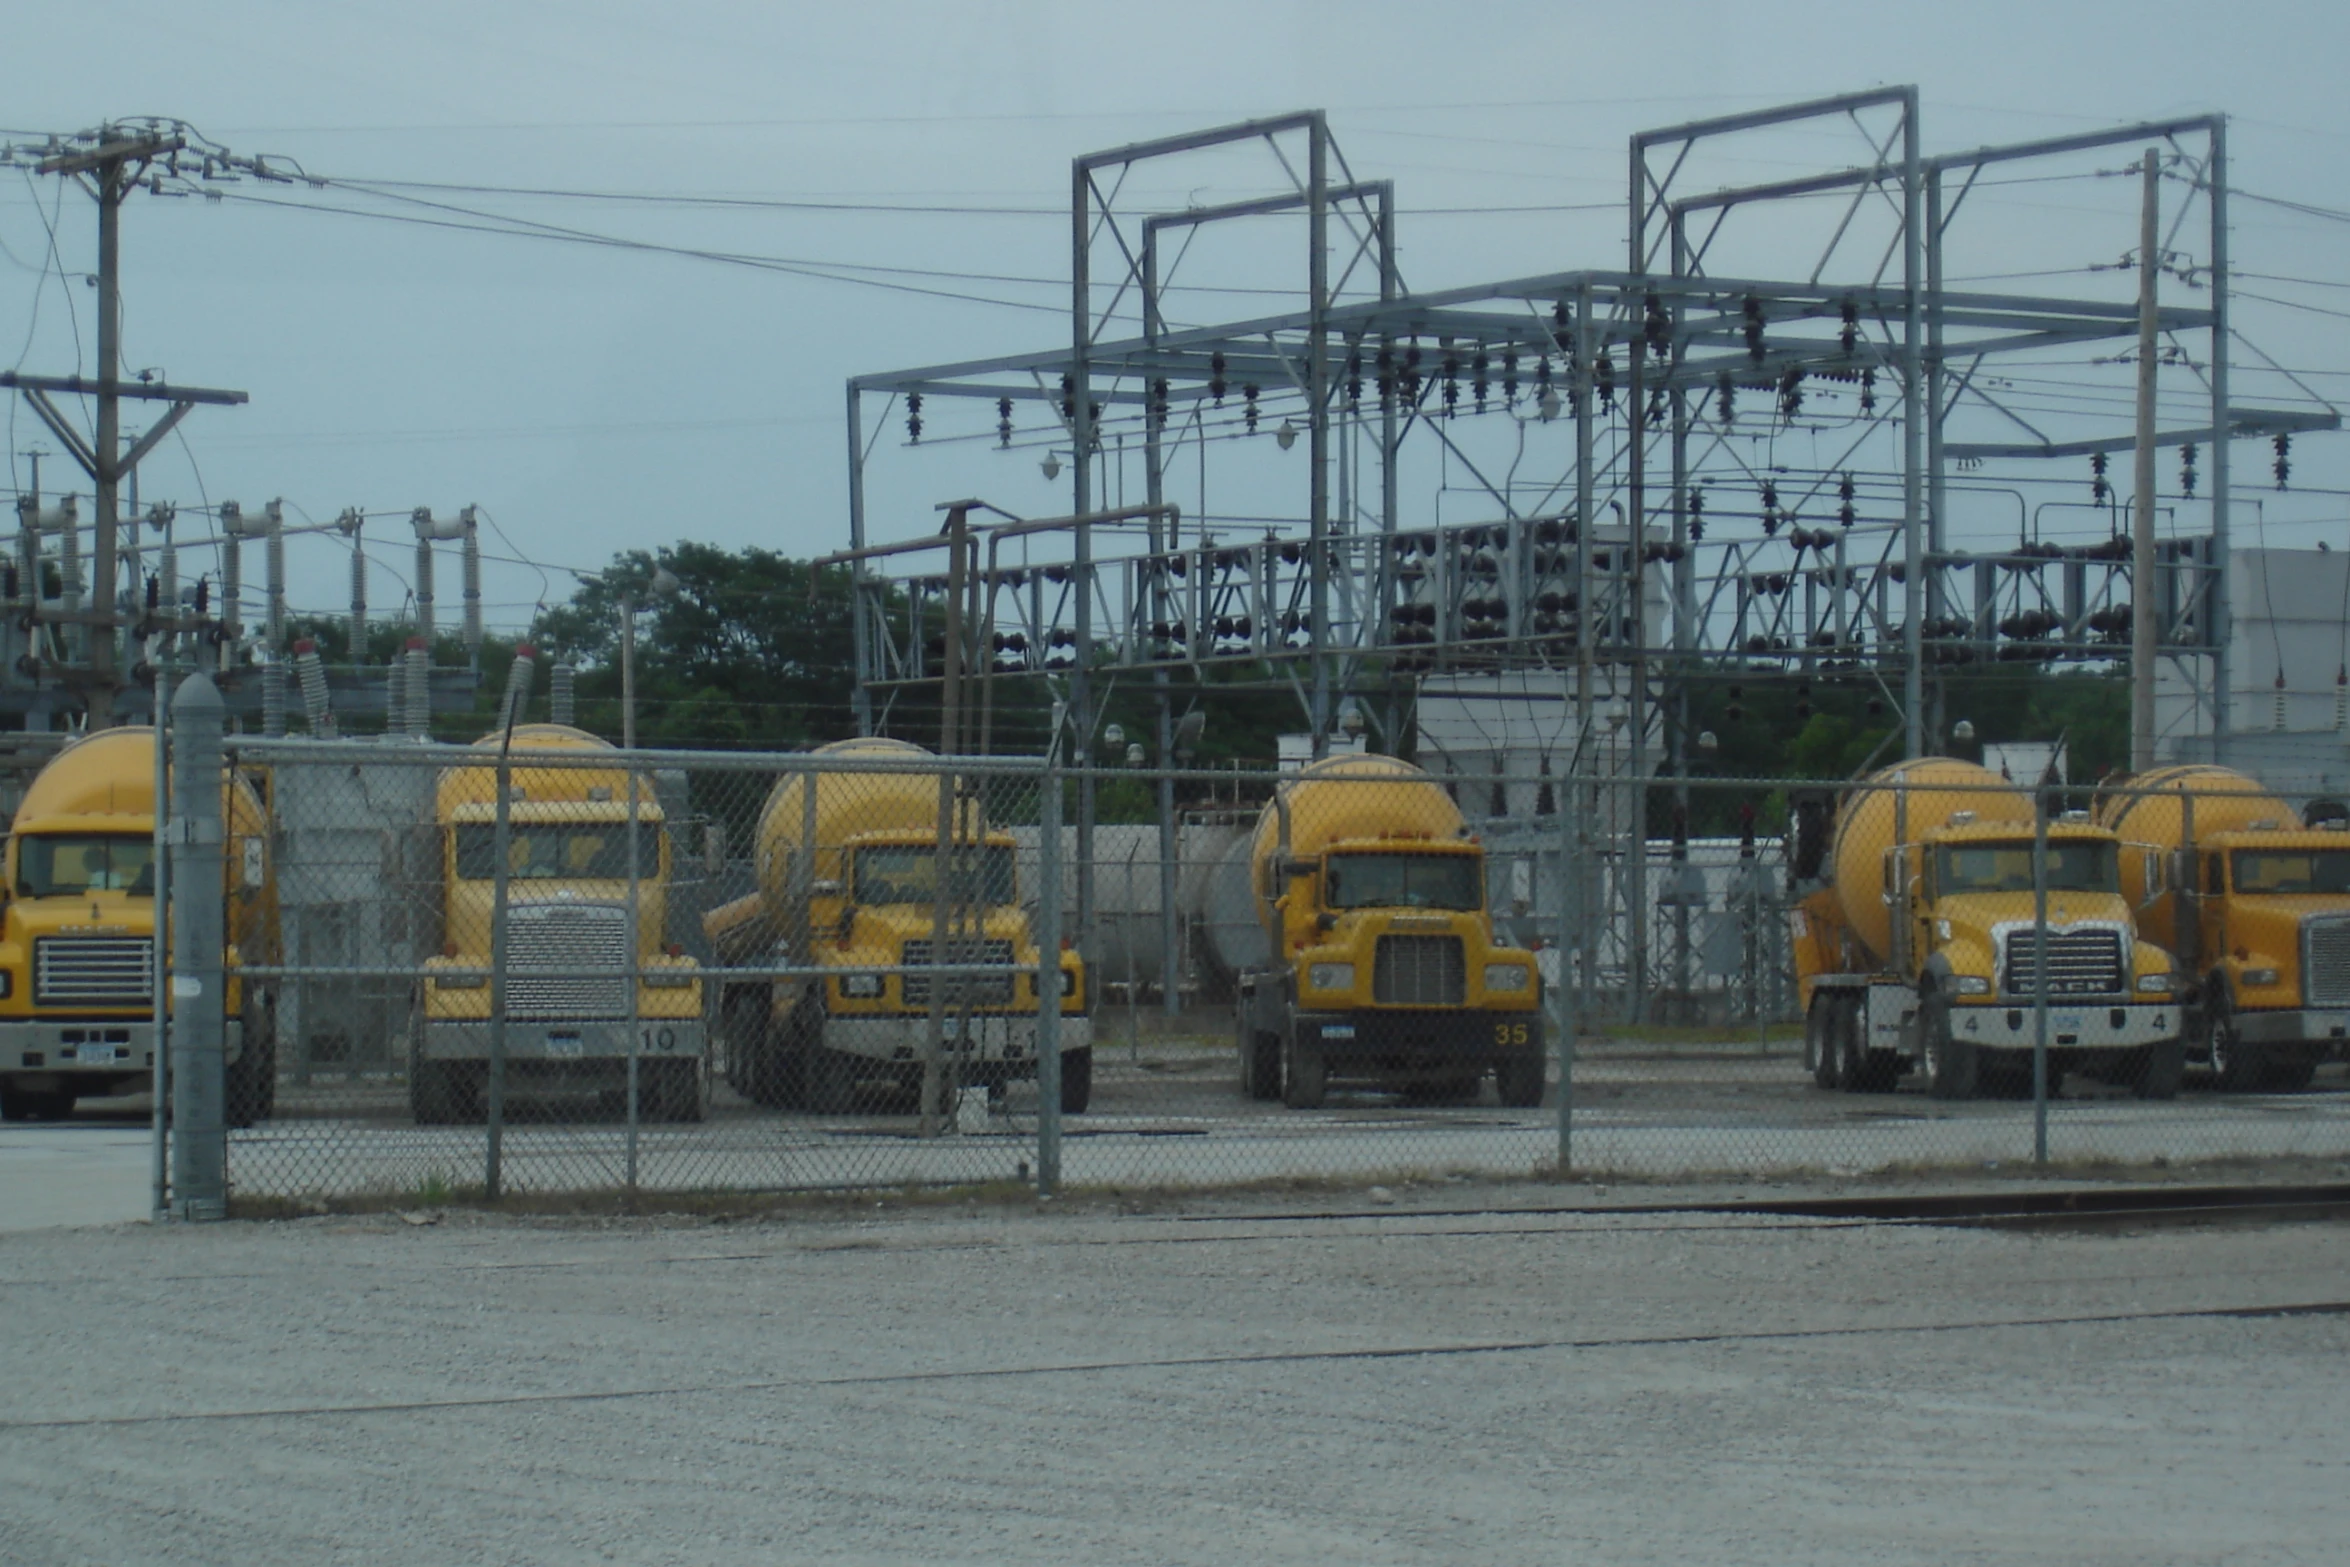 a large group of yellow trucks parked at an industrial plant